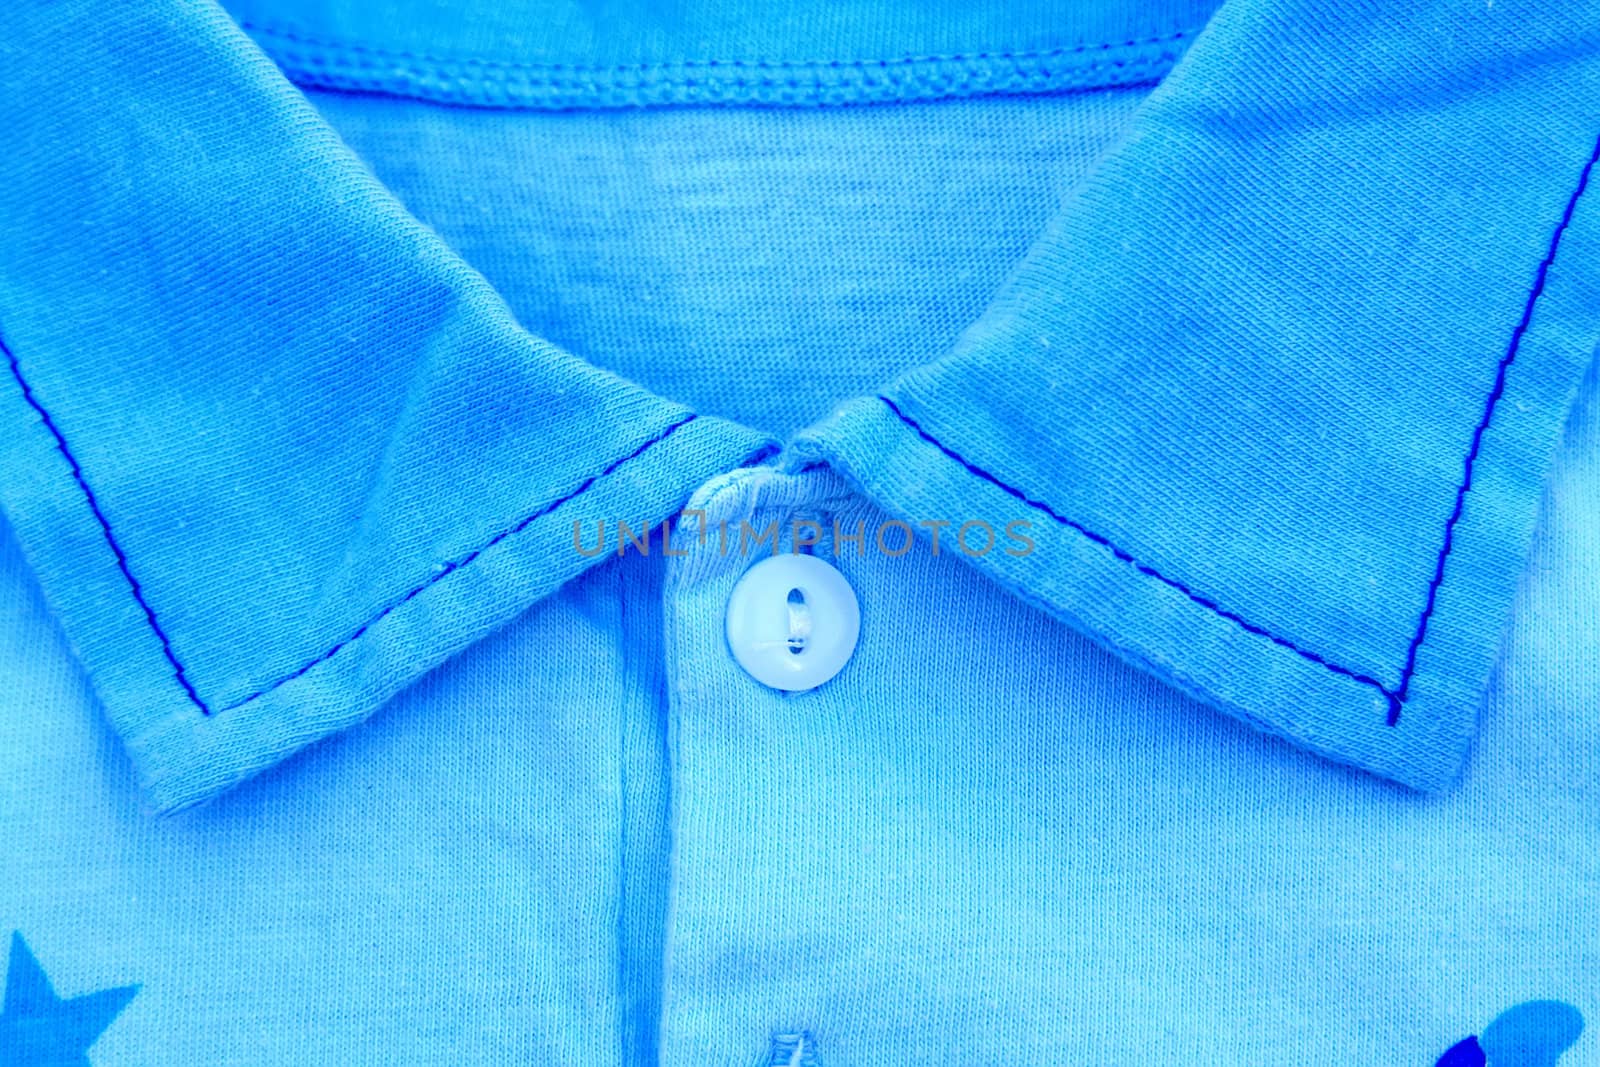 A part of a shirt with buttons